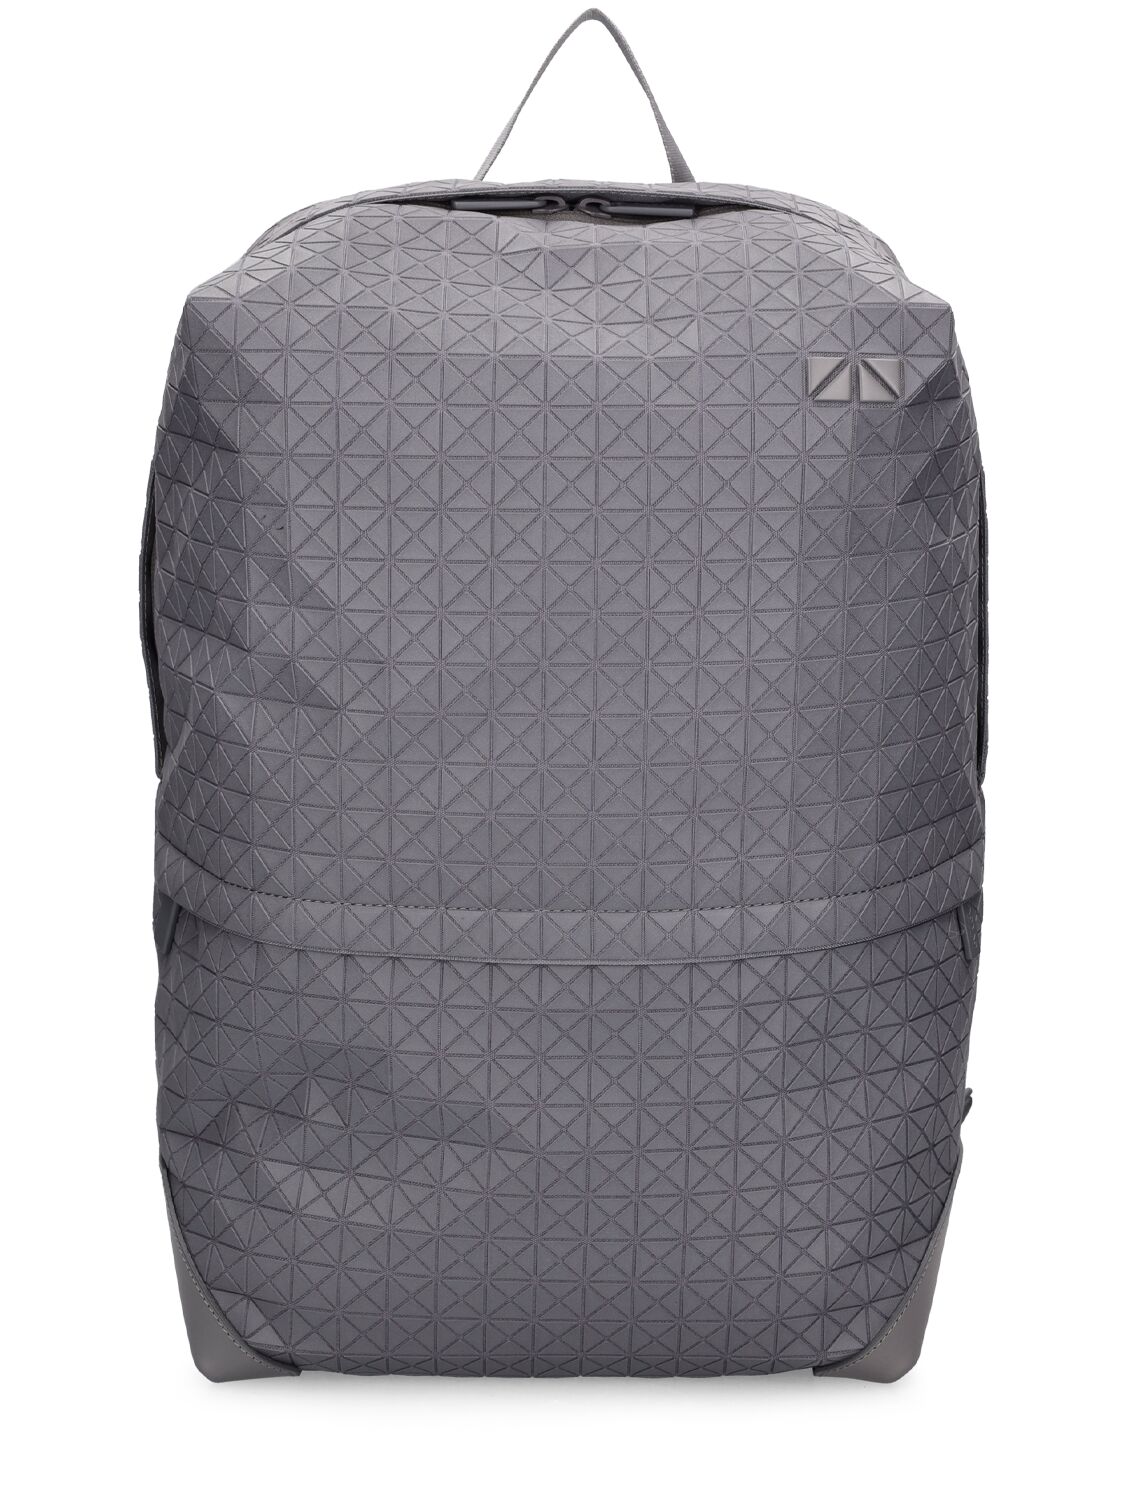 Image of Liner One Tone Backpack